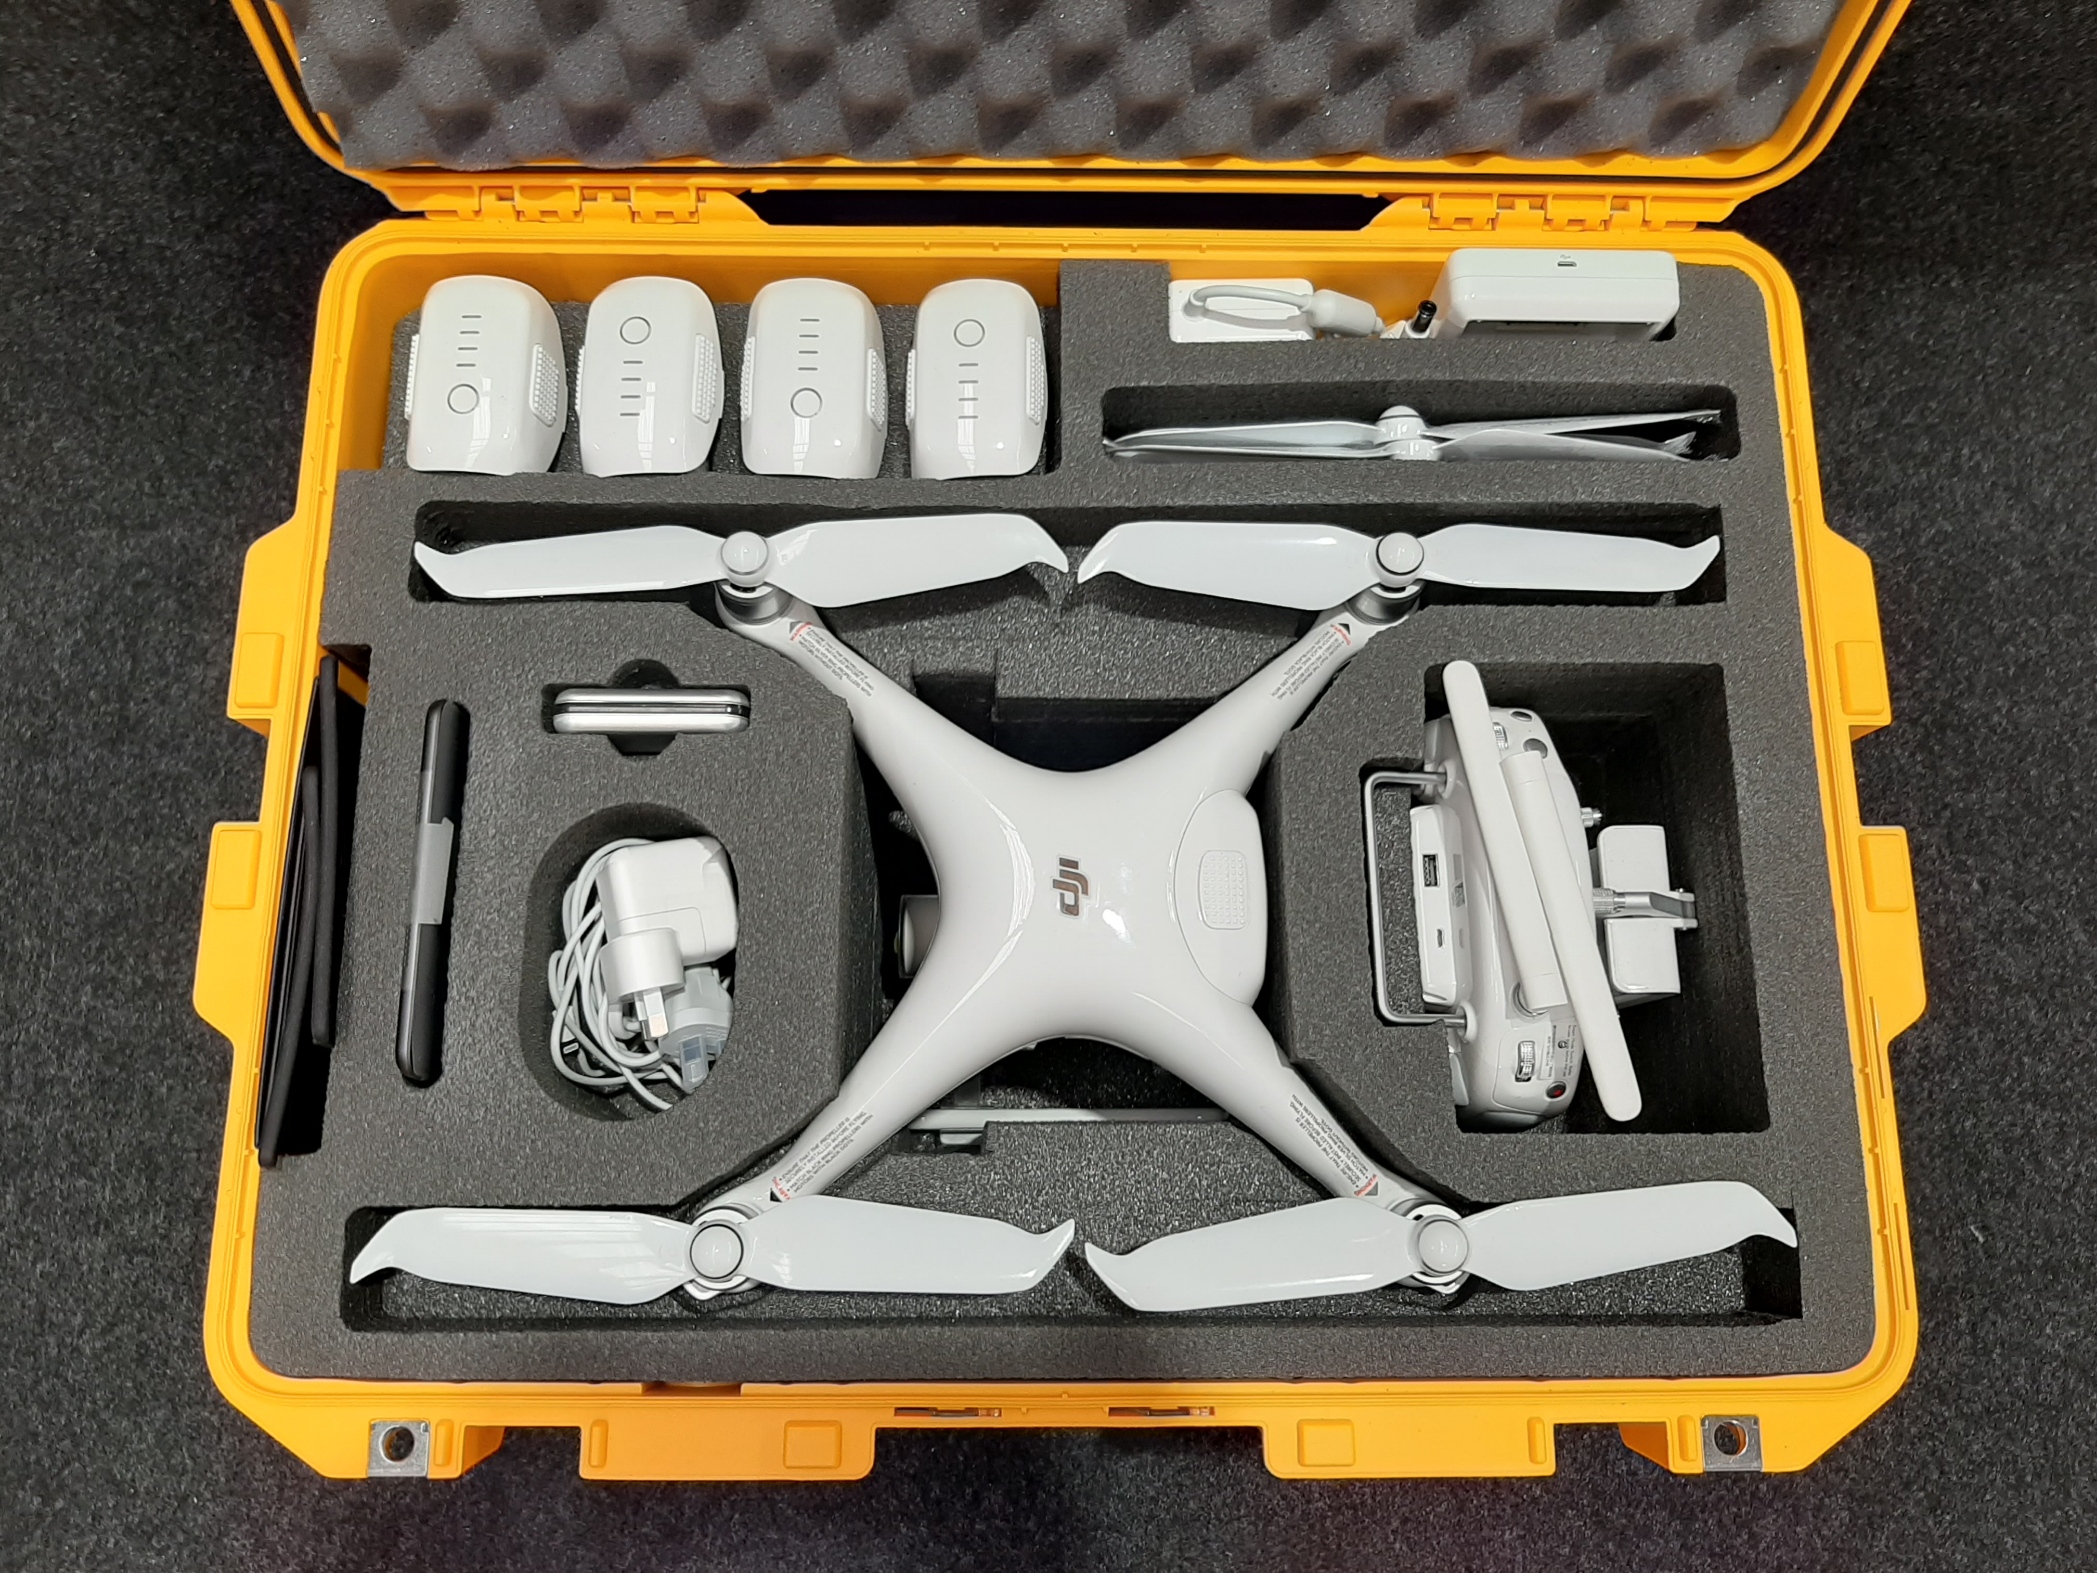 Pelican 1557 and 1607 Air and they Suit the DJI Phantoms custom fitted by Qld Protective Case in Brendale, Brisbane